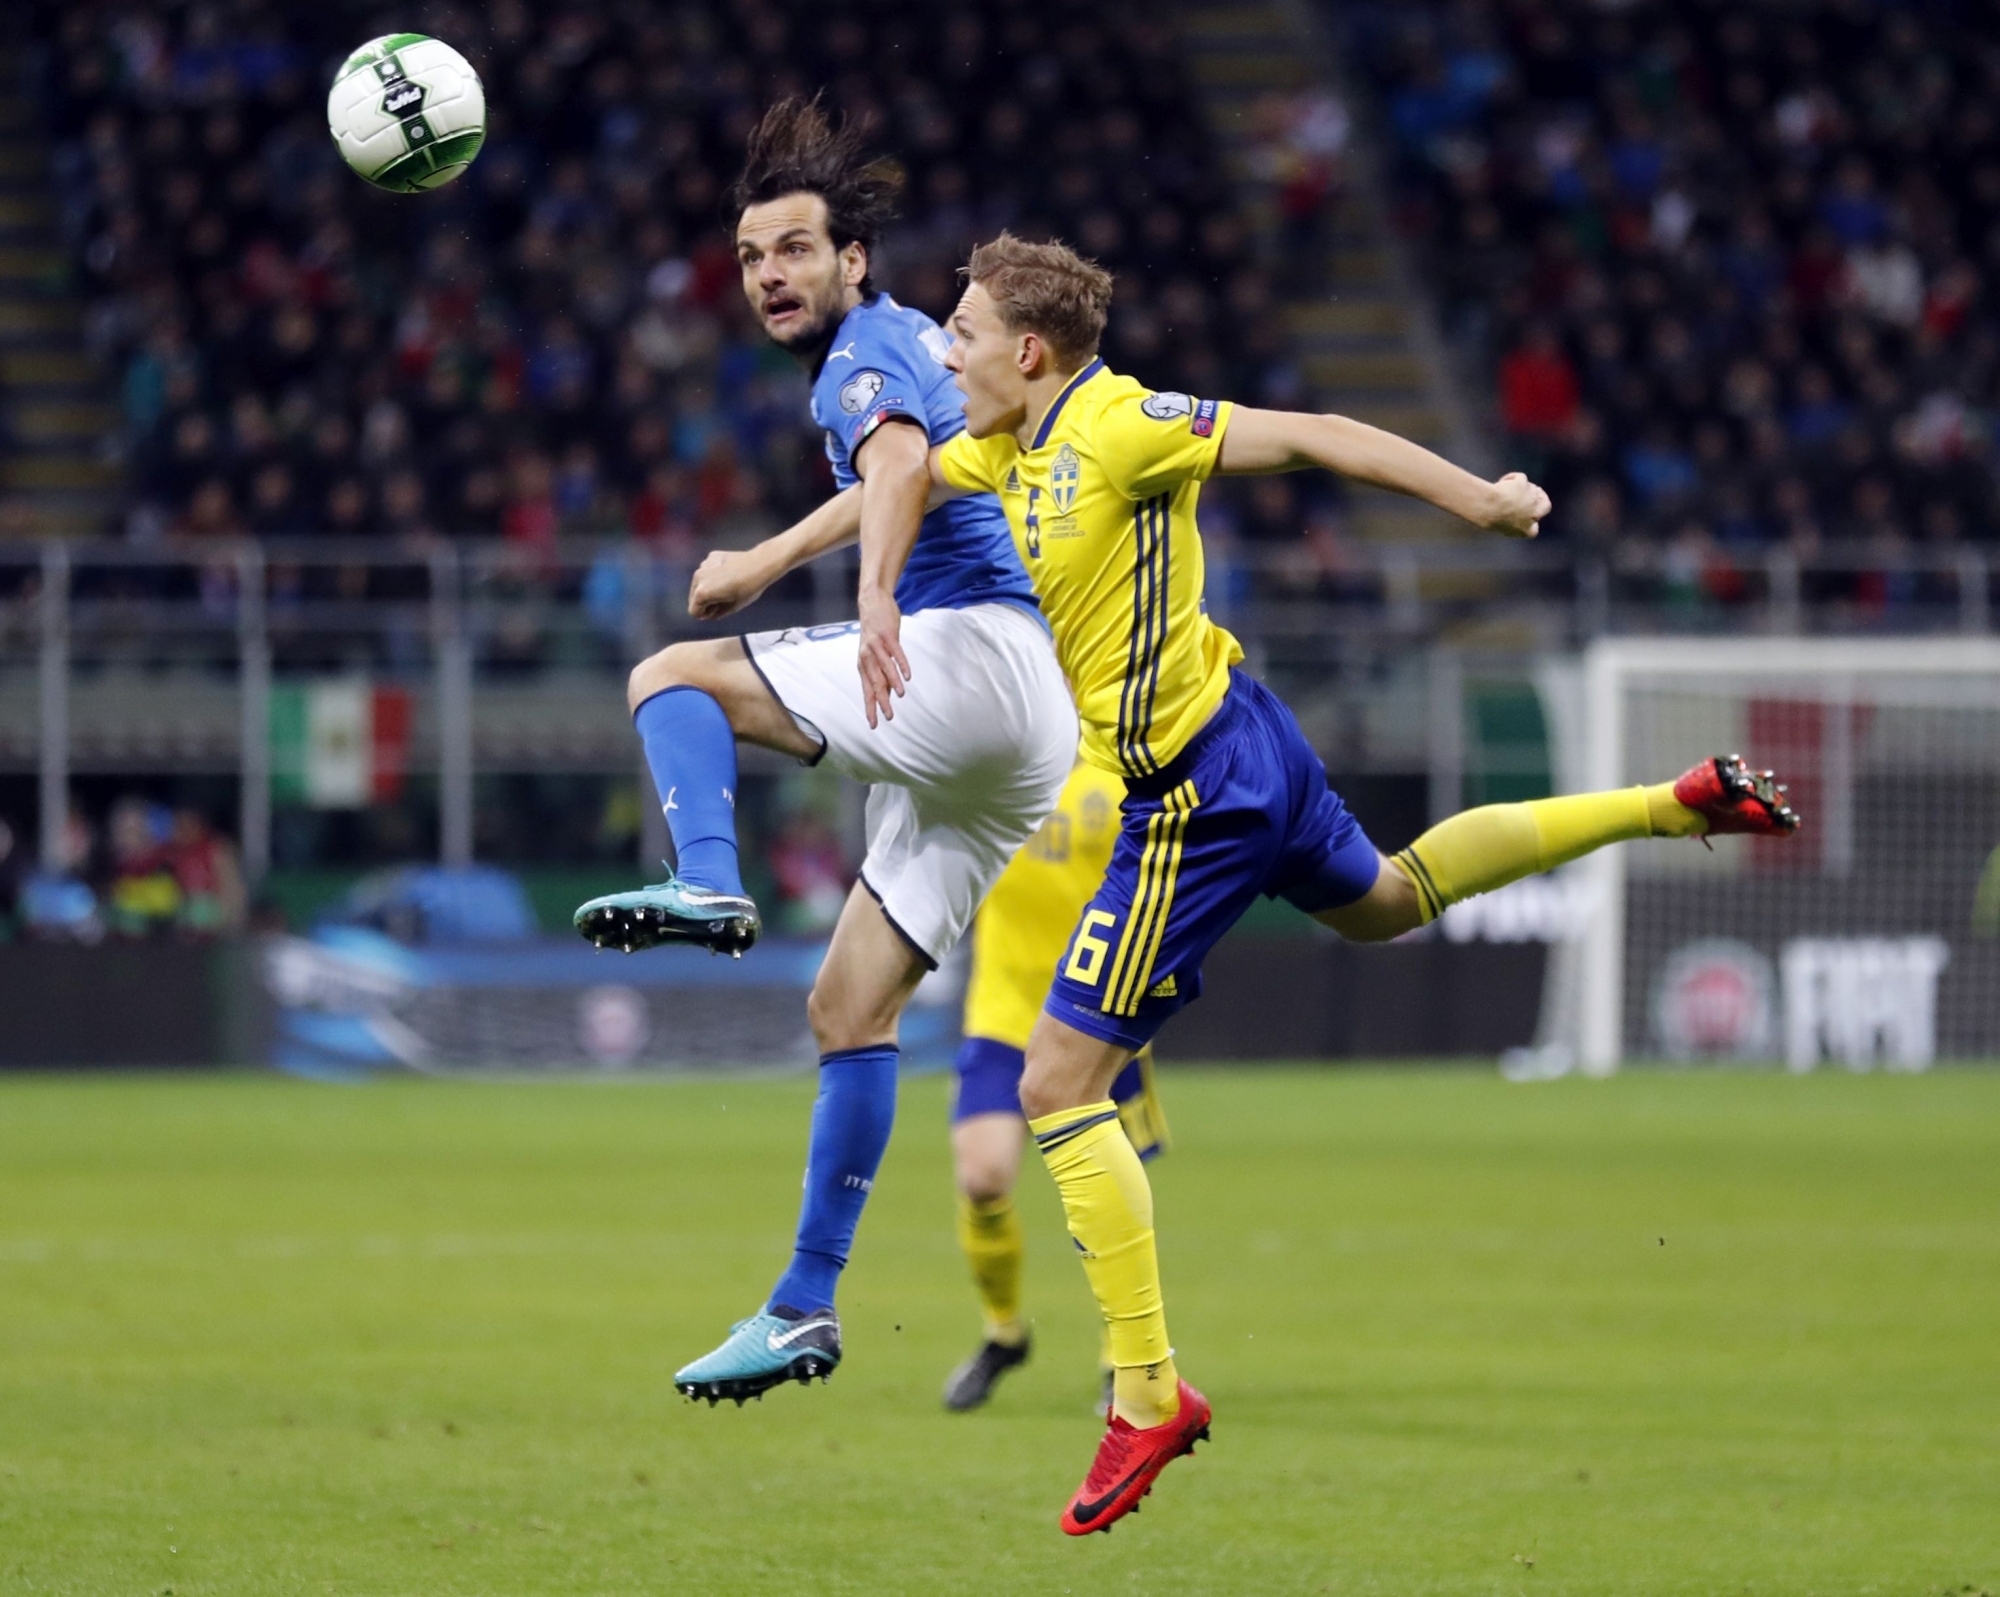 Sweden's Ludwig Augustinsson, right, and Italy's Marco Parolo jump for the ball during the World Cup qualifying play-off second leg soccer match between Italy and Sweden, at the Milan San Siro stadium, Italy, Monday, Nov. 13, 2017. (AP Photo/Antonio Calanni)